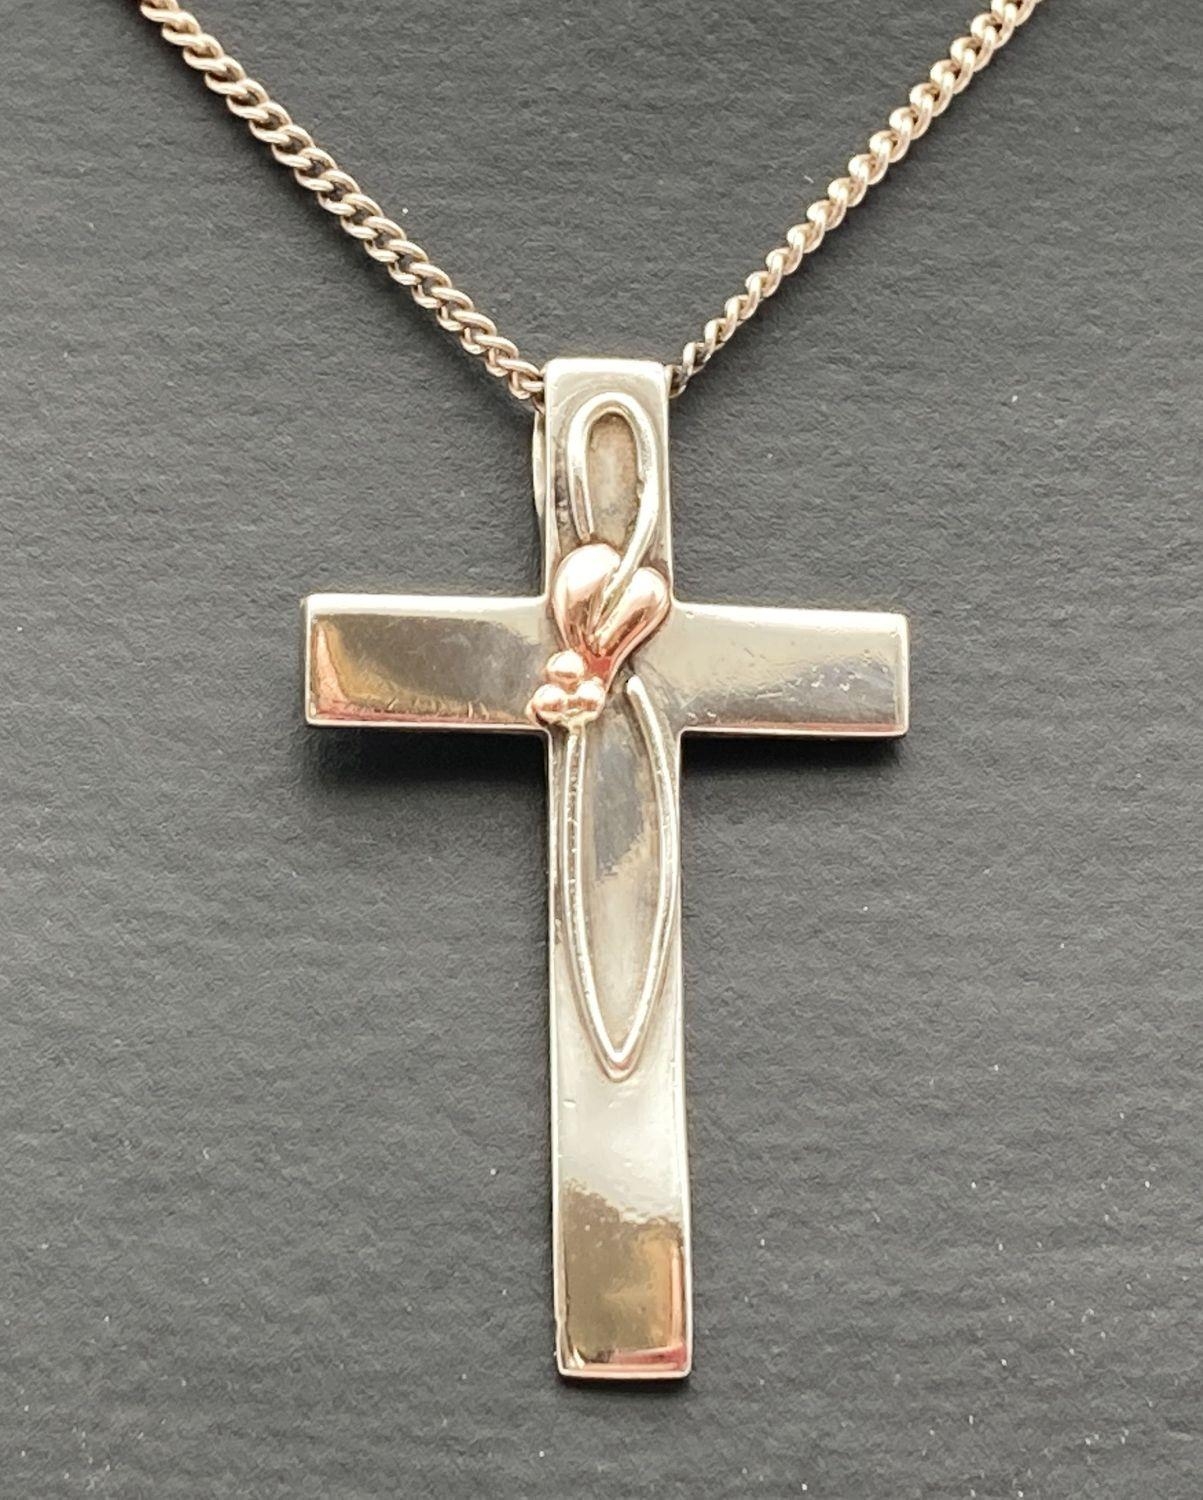 A silver and Welsh gold accent Clogau cross pendant on an 18 inch curb chain. Pendant marked "